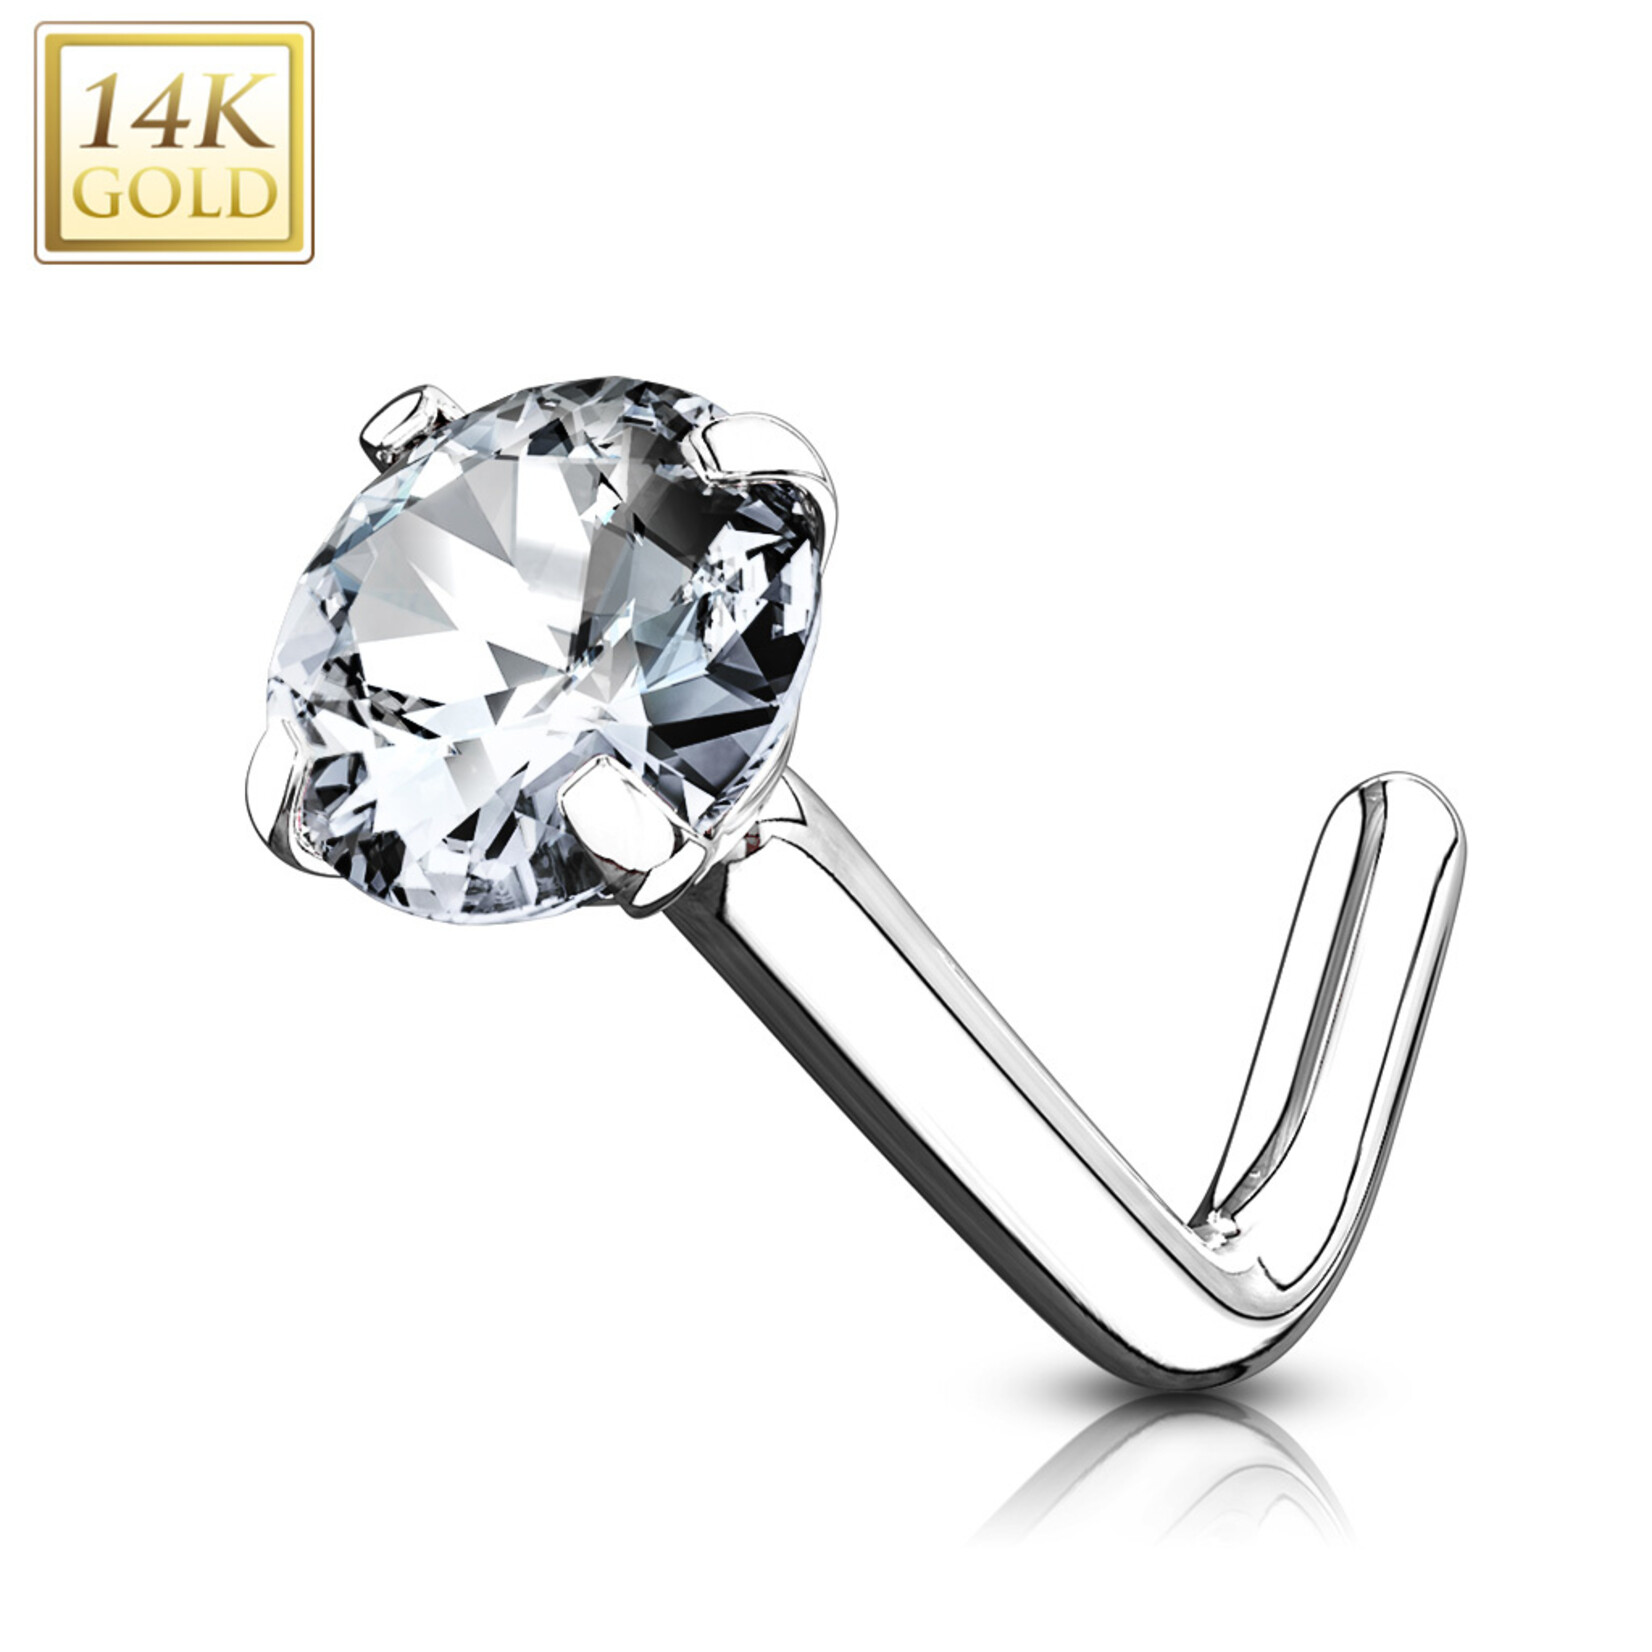 Hollywood Body Jewelry Gem L Bend Nose Pin